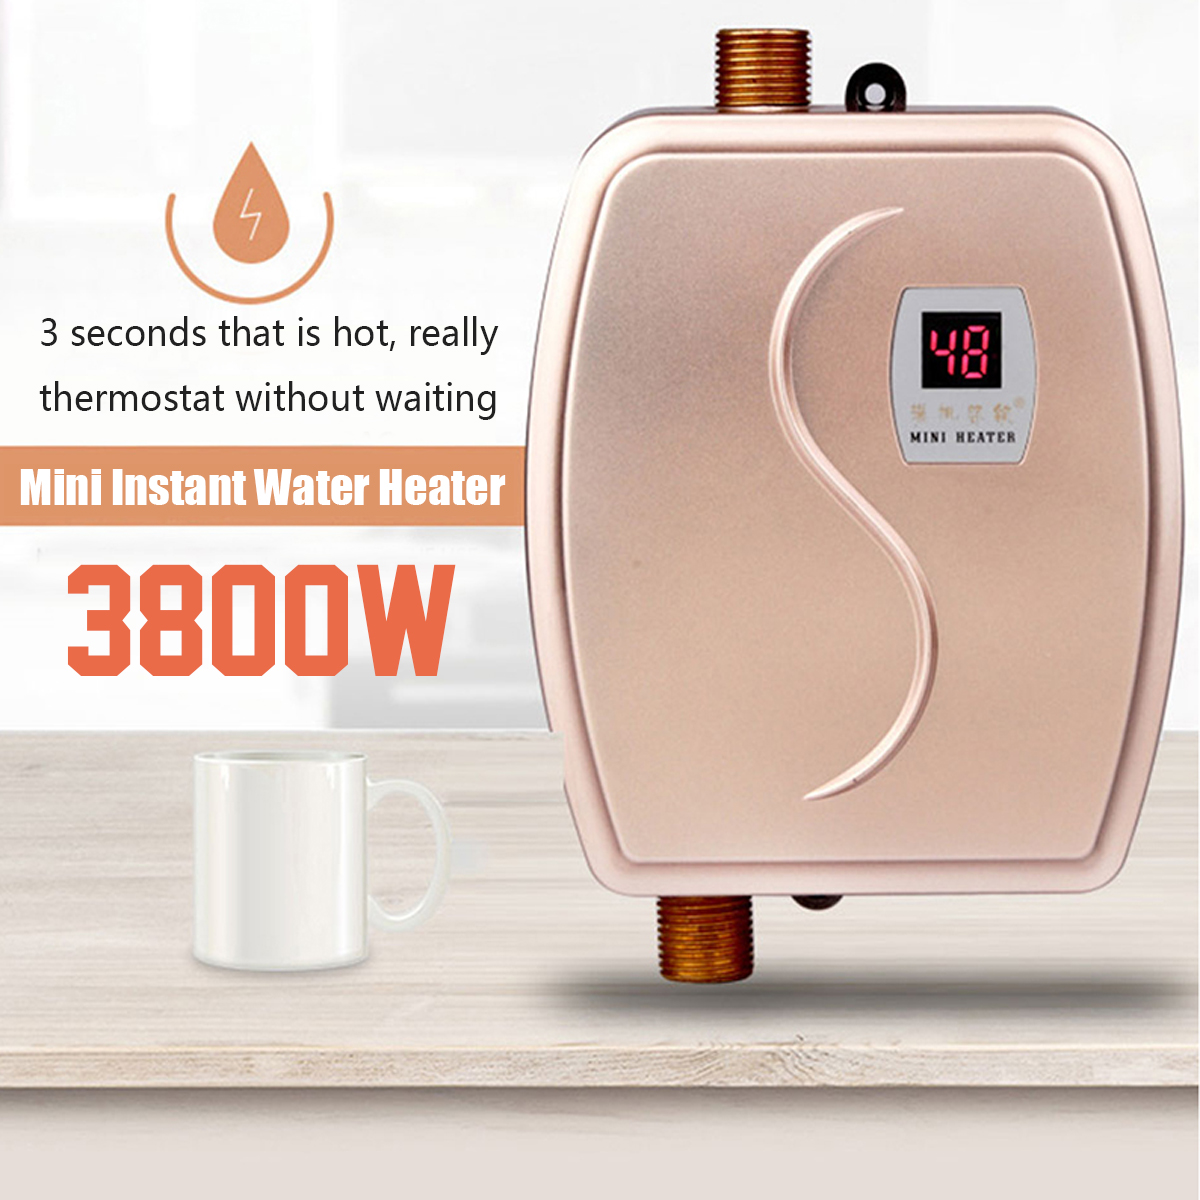 3800W-3000W-Mini-Tankless-Instant-Hot-Water-Heater-Faucet-kitchen-Heating-Thermostat-1366830-4